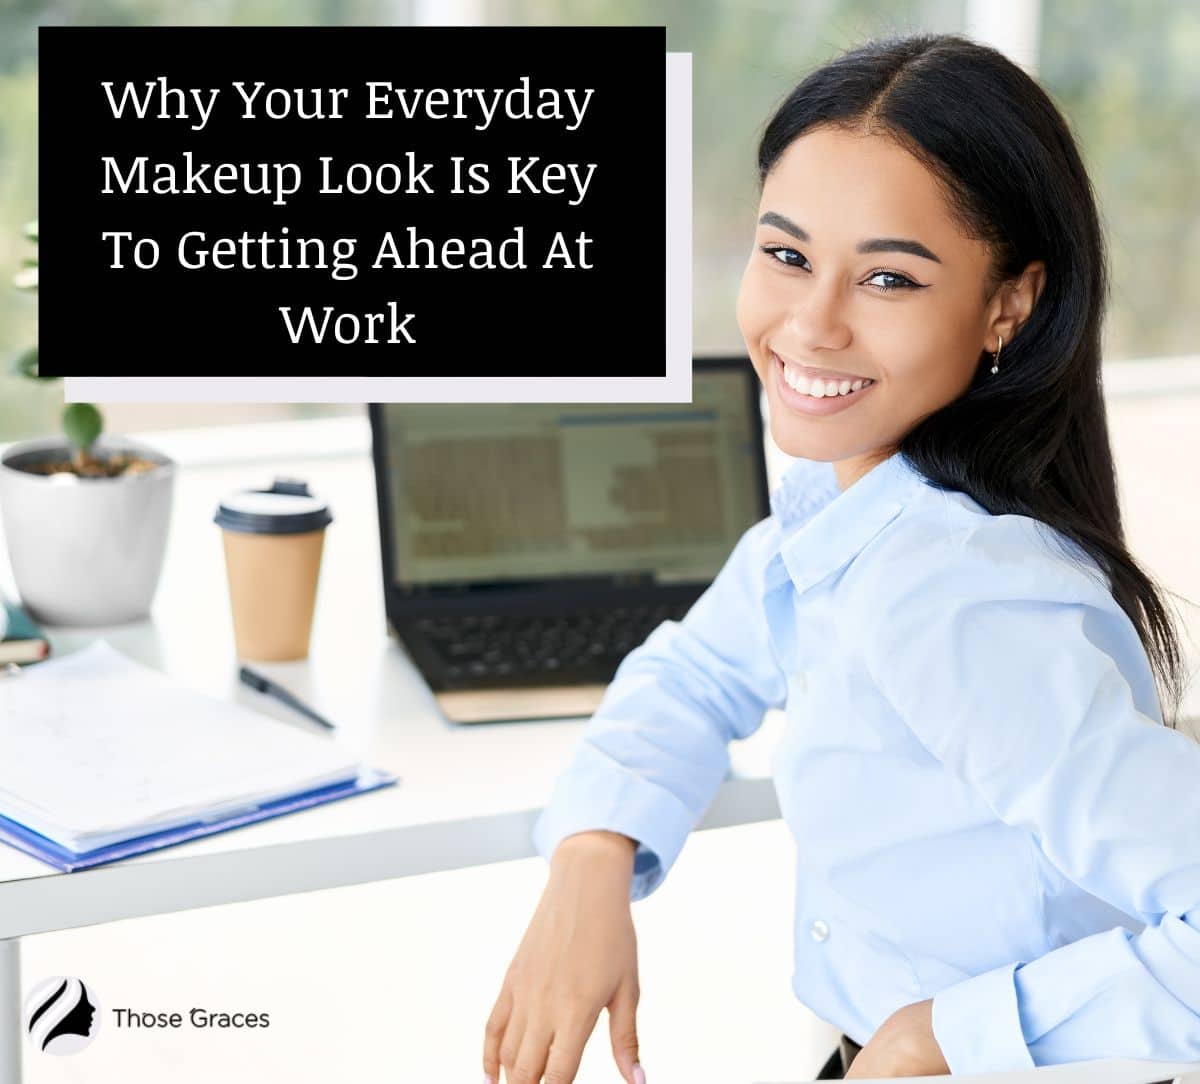 office woman smiling at the camera but Why Your Everyday Makeup Look Is Key To Getting Ahead At Work?